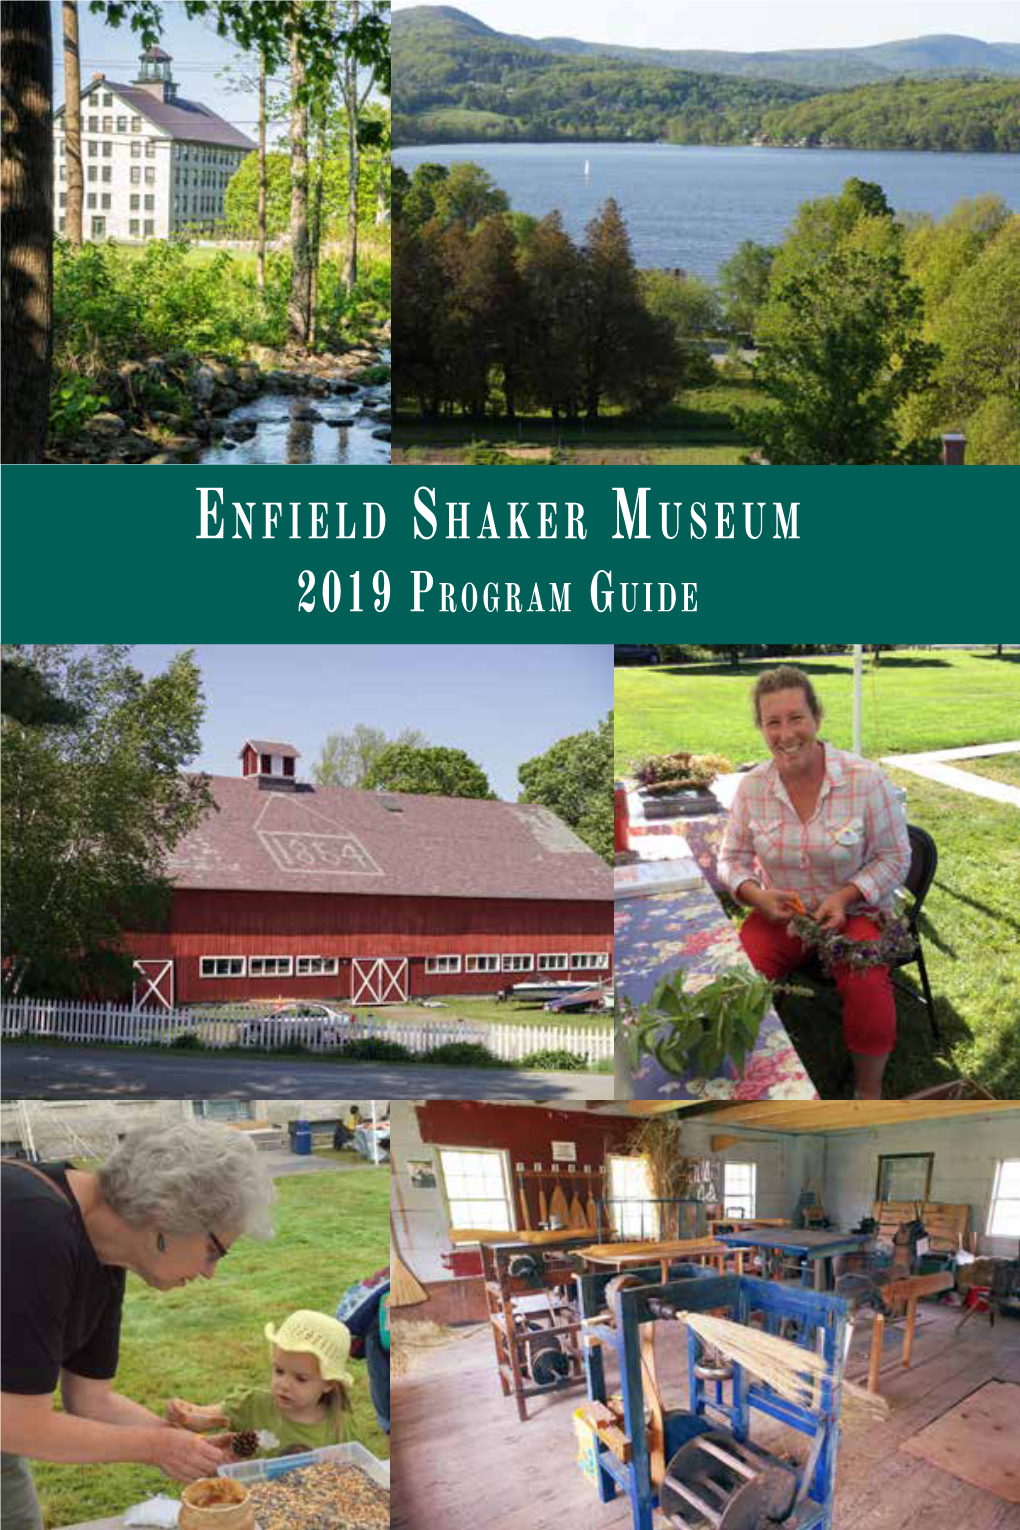 Enfield Shaker Museum Plan a Visit Today!